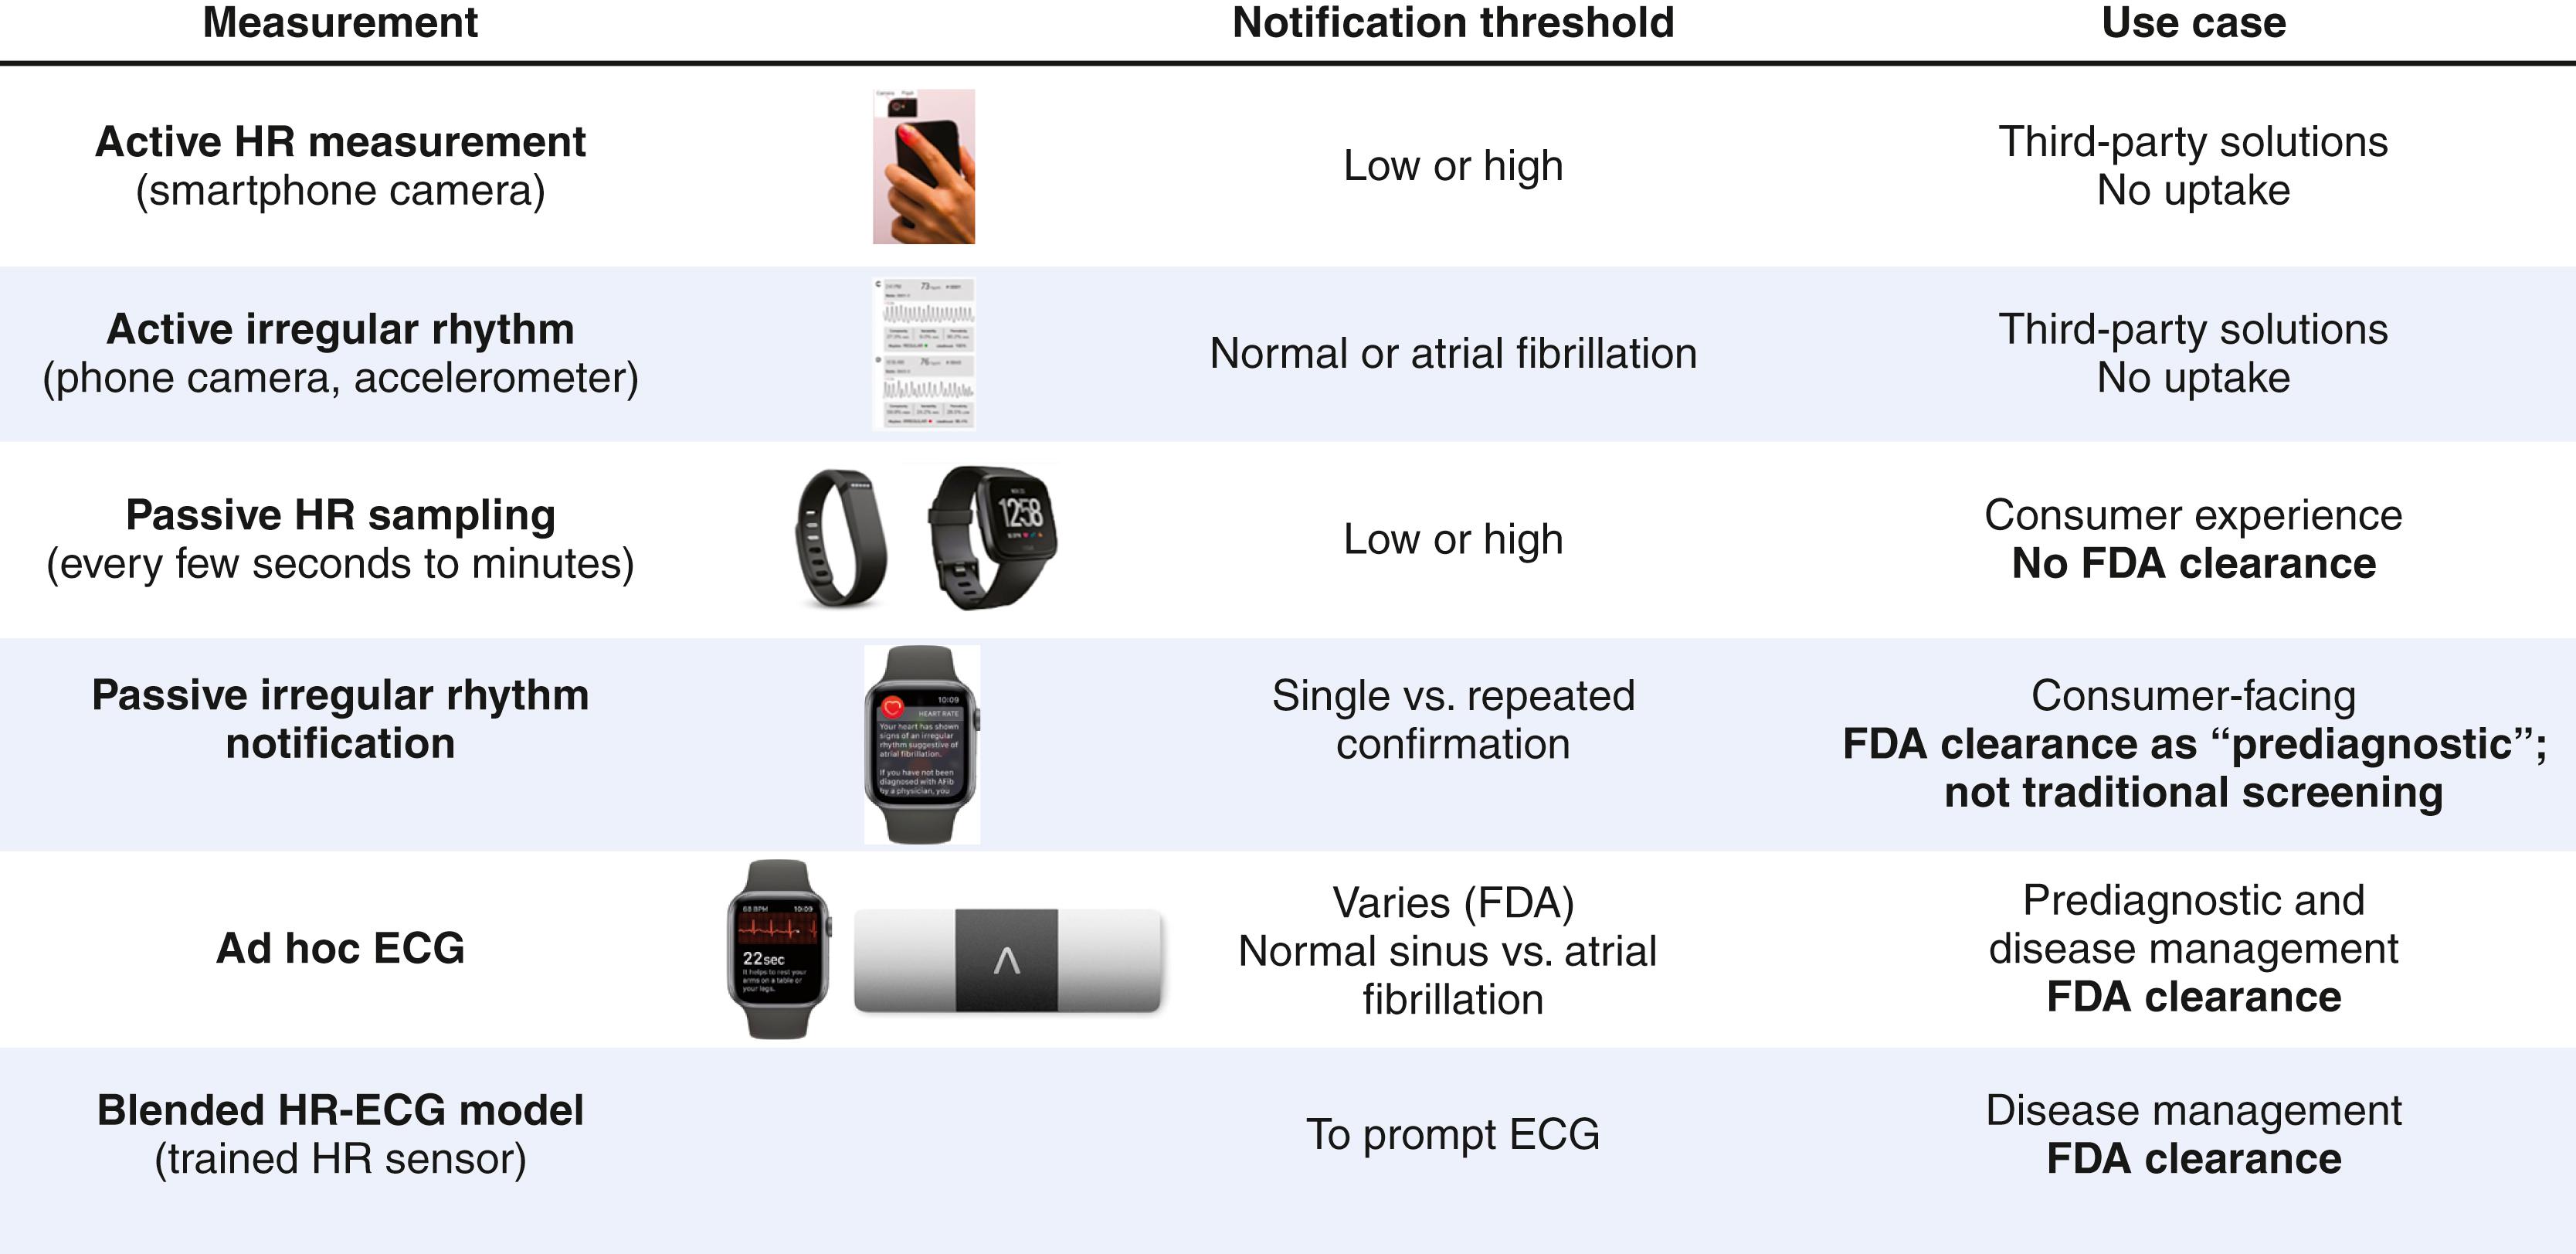 FIGURE 12.2, Evolution of consumer-facing photoplethysmography pulse measurement. (From Google, AliveCor. Screenshots reprinted with permission from Apple Inc.)